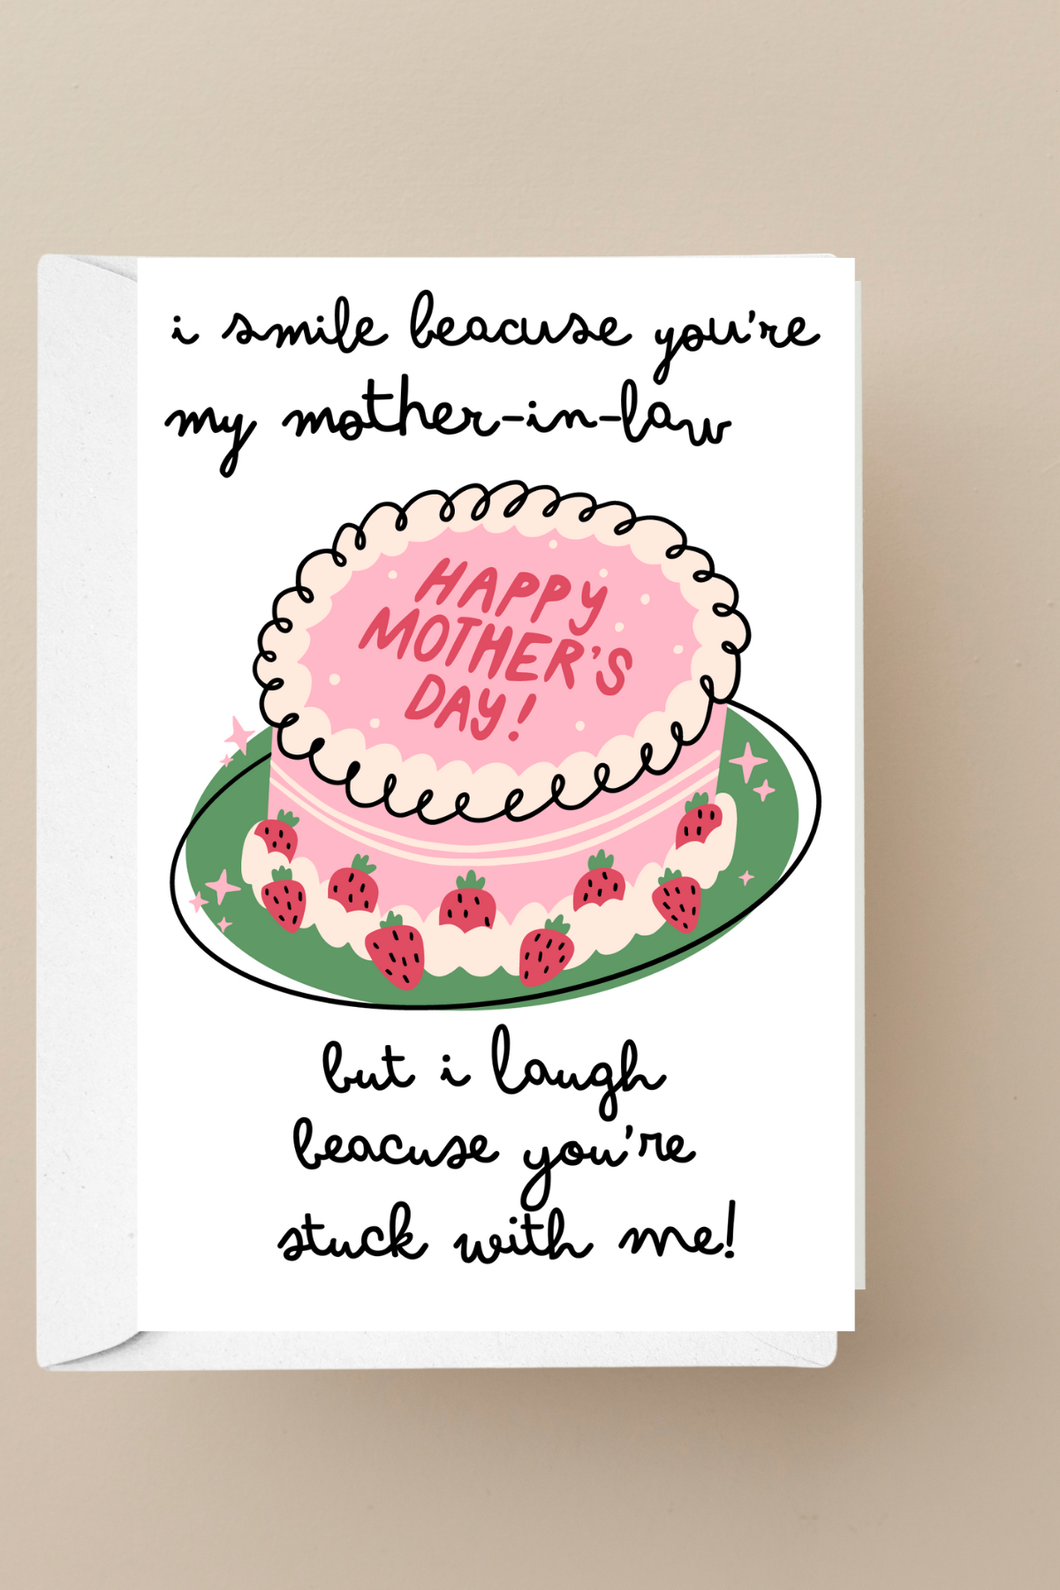 Mother in Law Card